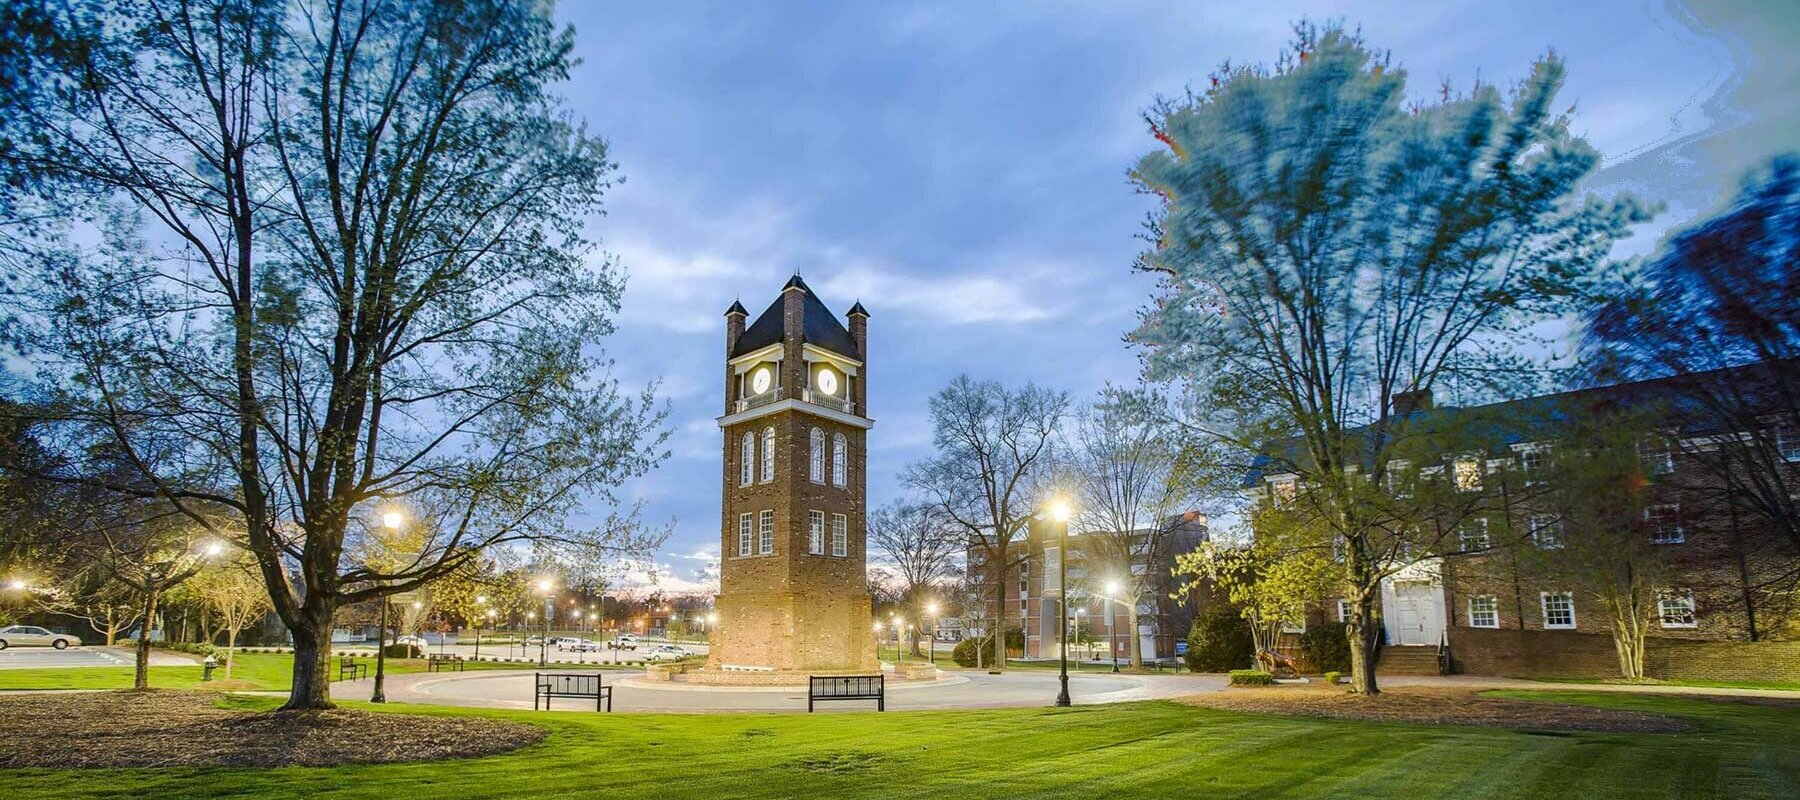 Nestled in the heart of this charming state, Barton College offers a one-of-a-kind educational experience that perfectly blends tradition and innovation. Contact our team today and let us help you sell a home for cash in Wilson NC.